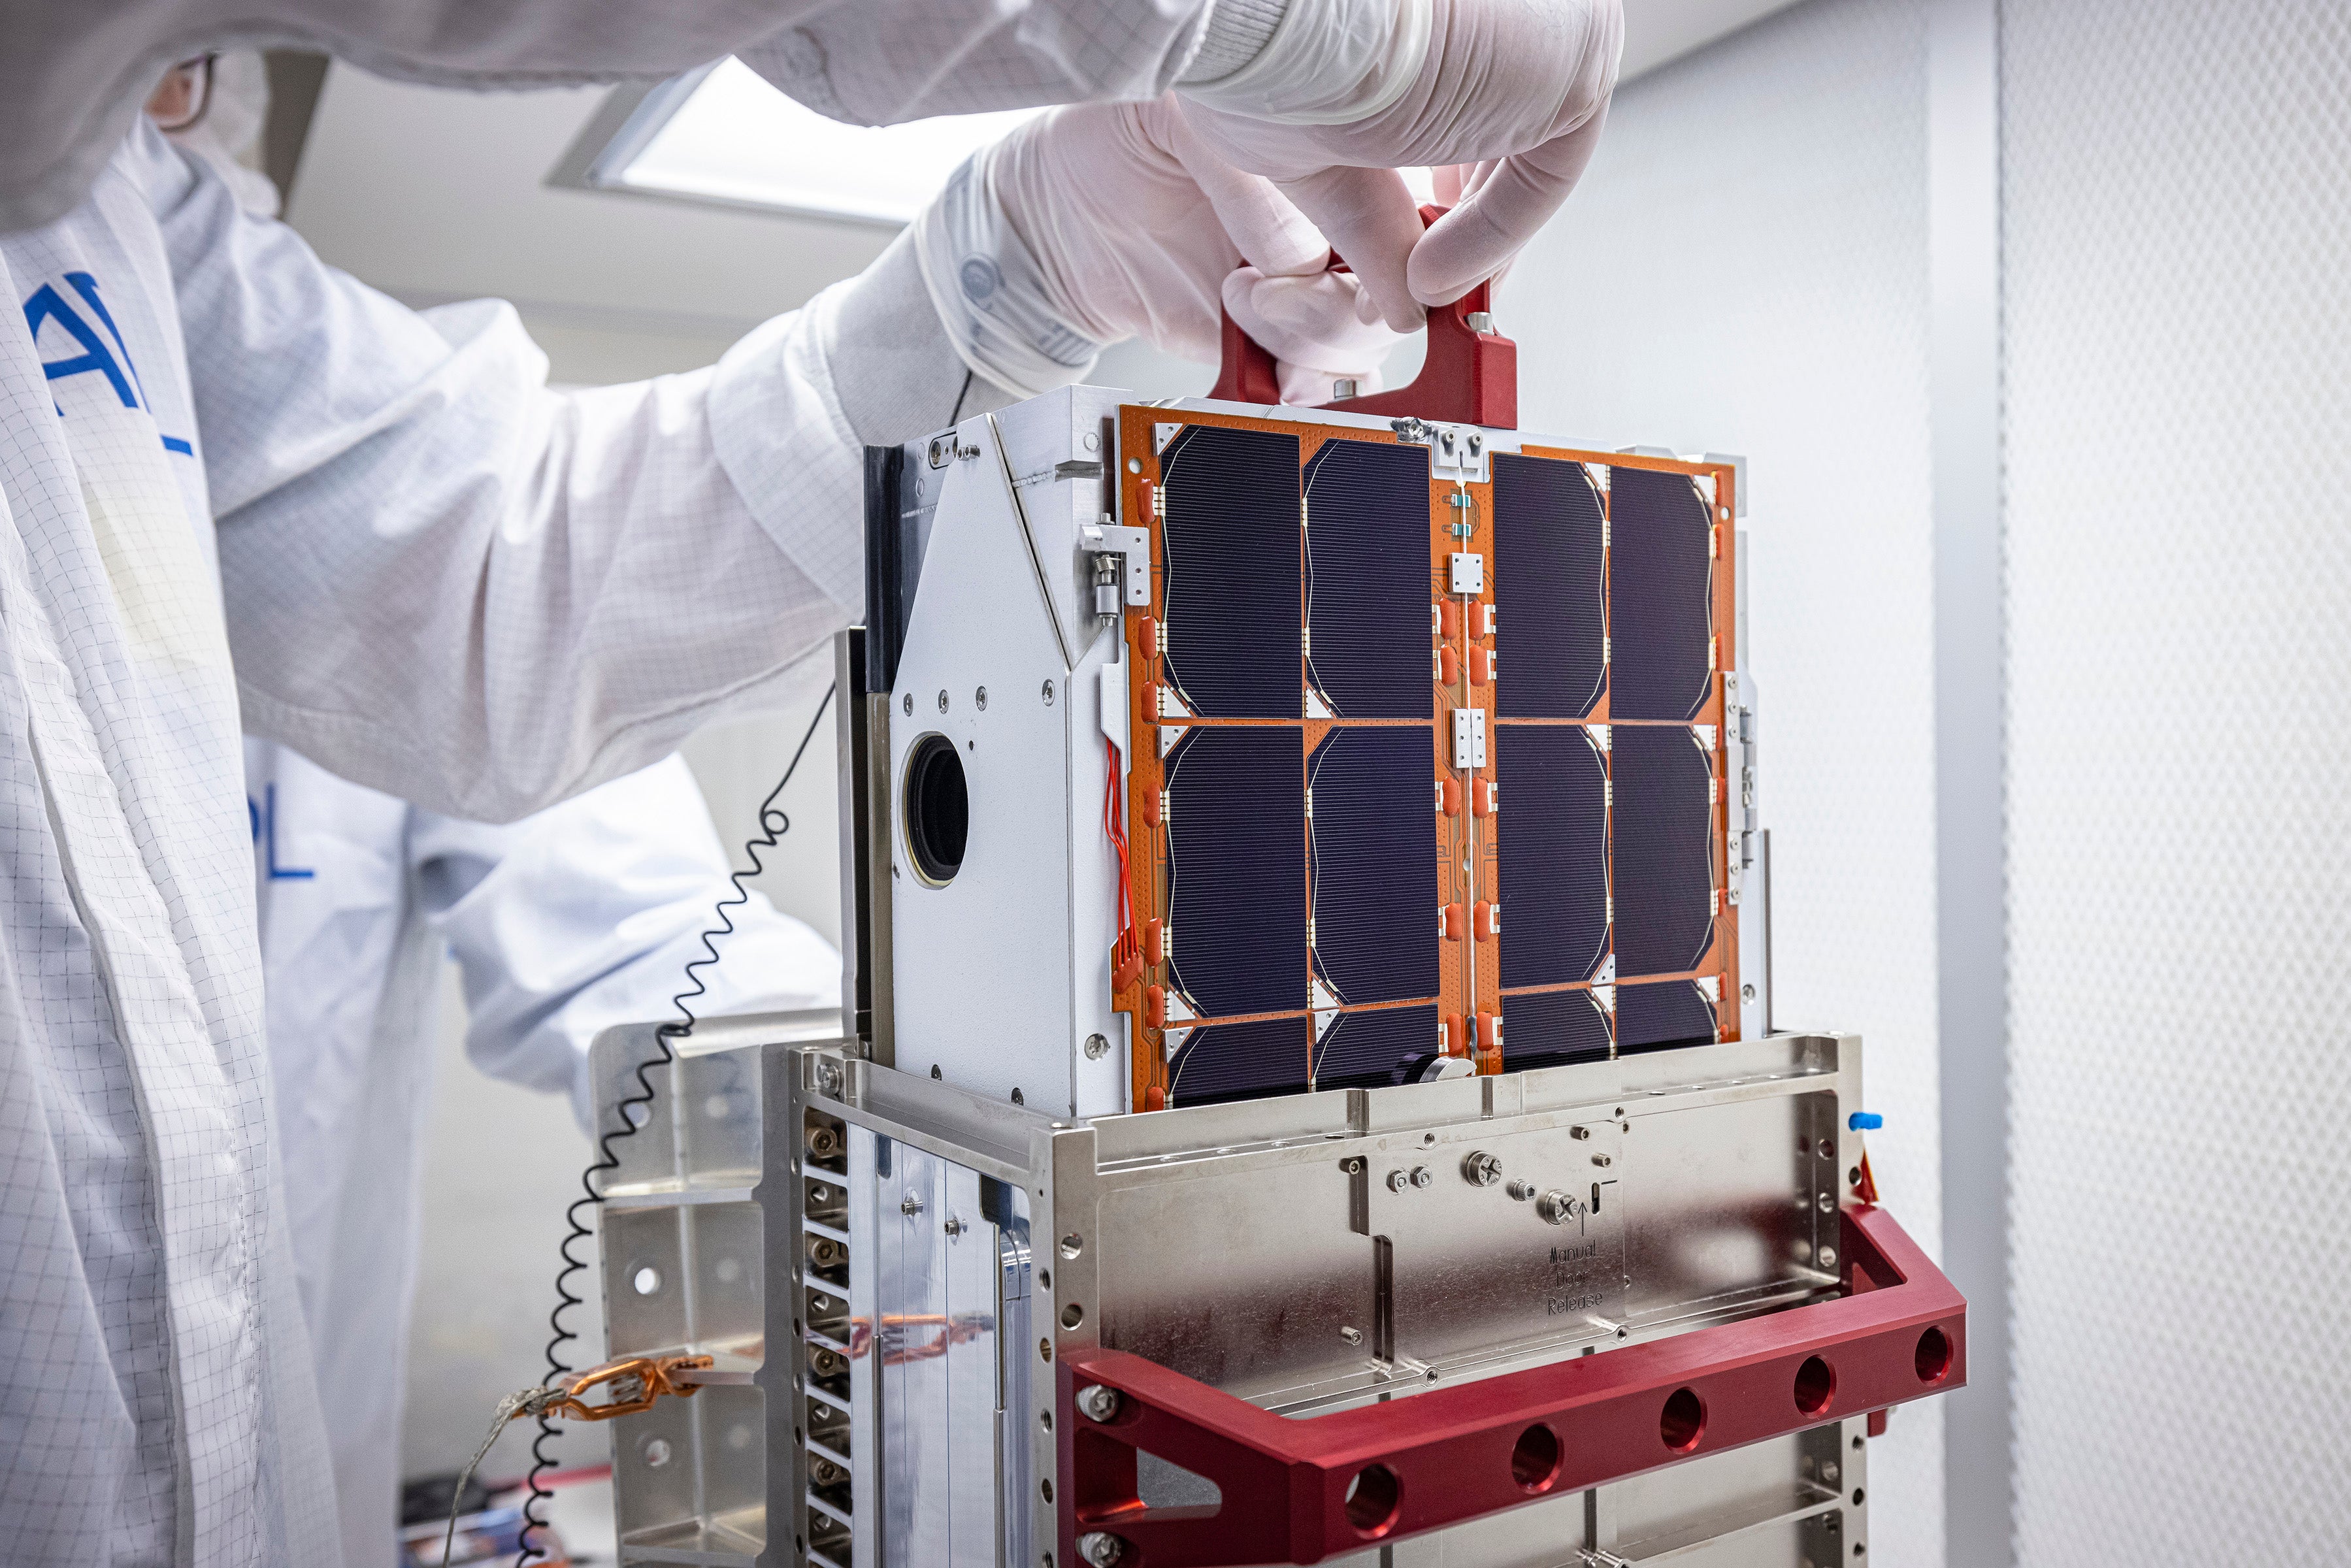 The Italian Space Agency’s Light Italian CubeSat for Imaging of Asteroid of LiciaCube in at the Johns Hopkins Applied Physics Laboratory in 2021